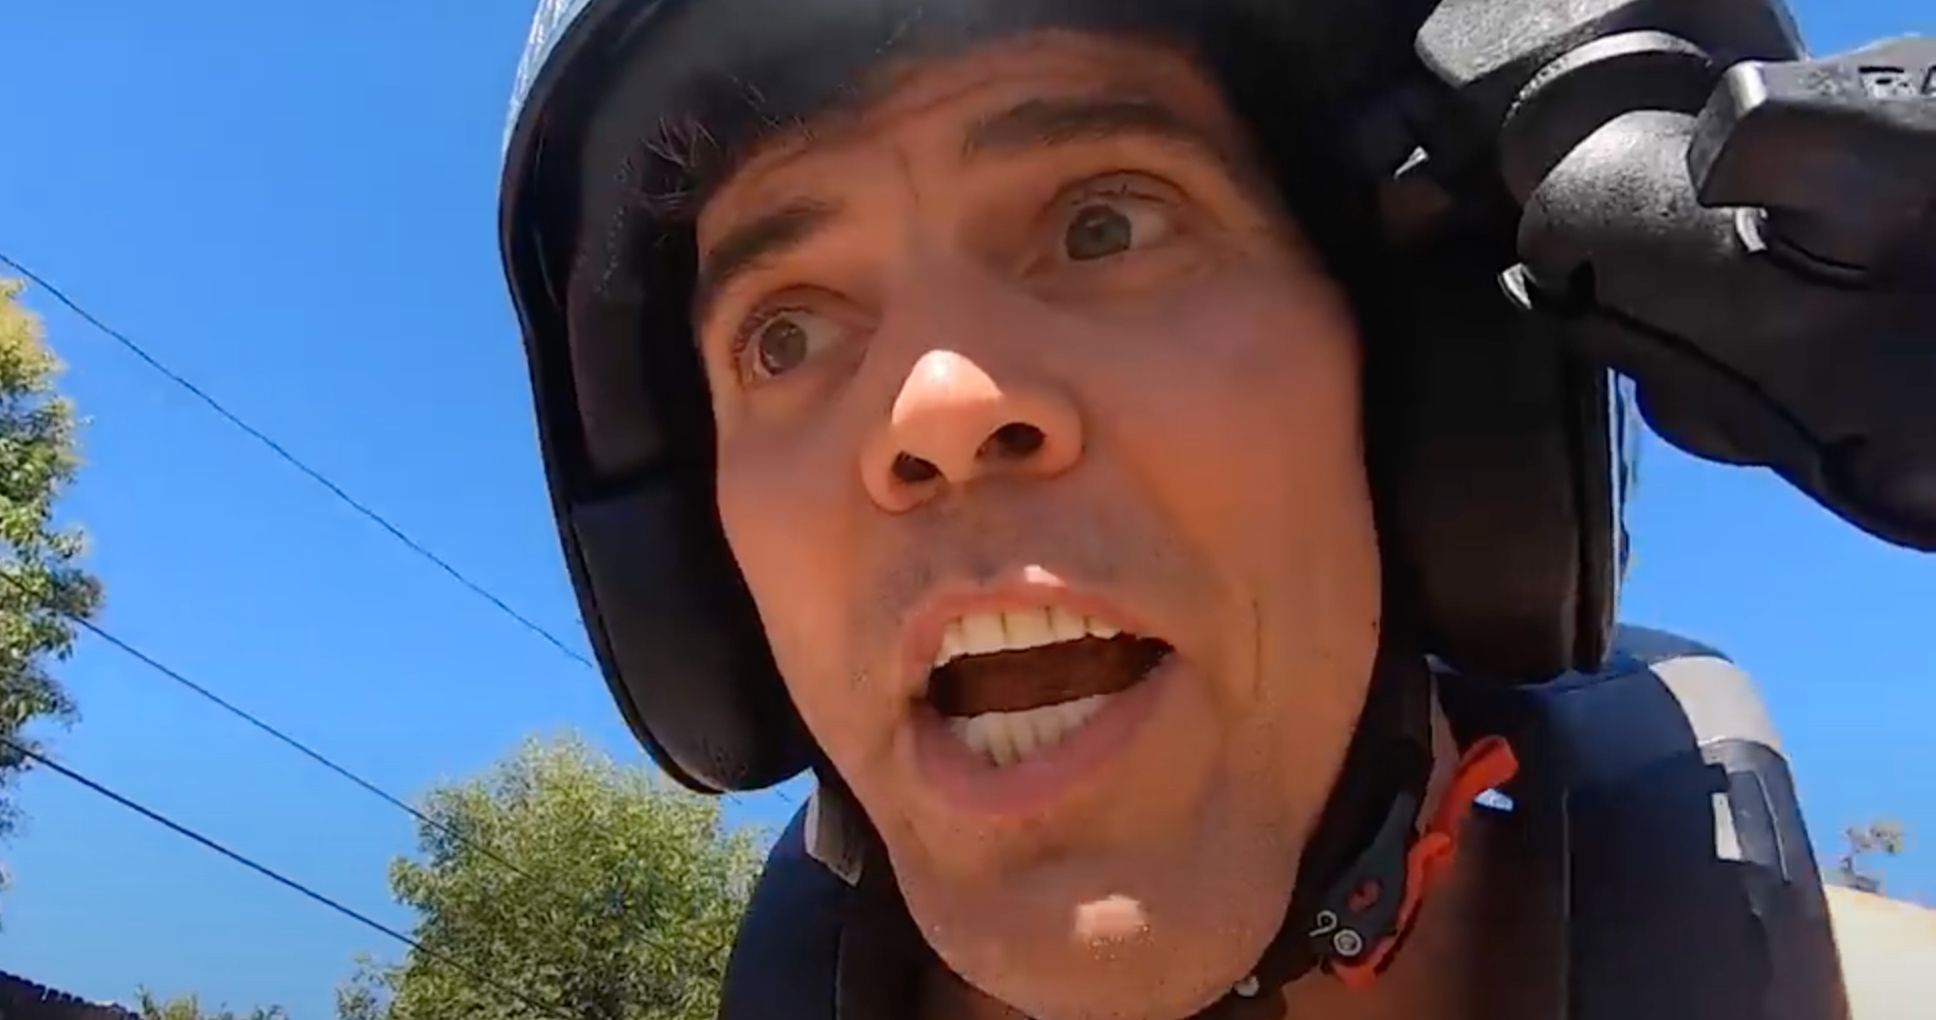 Steve-O Teases Crazy Jackass 4 Stunts, Which Include Paralyzing Himself from the Waist Down